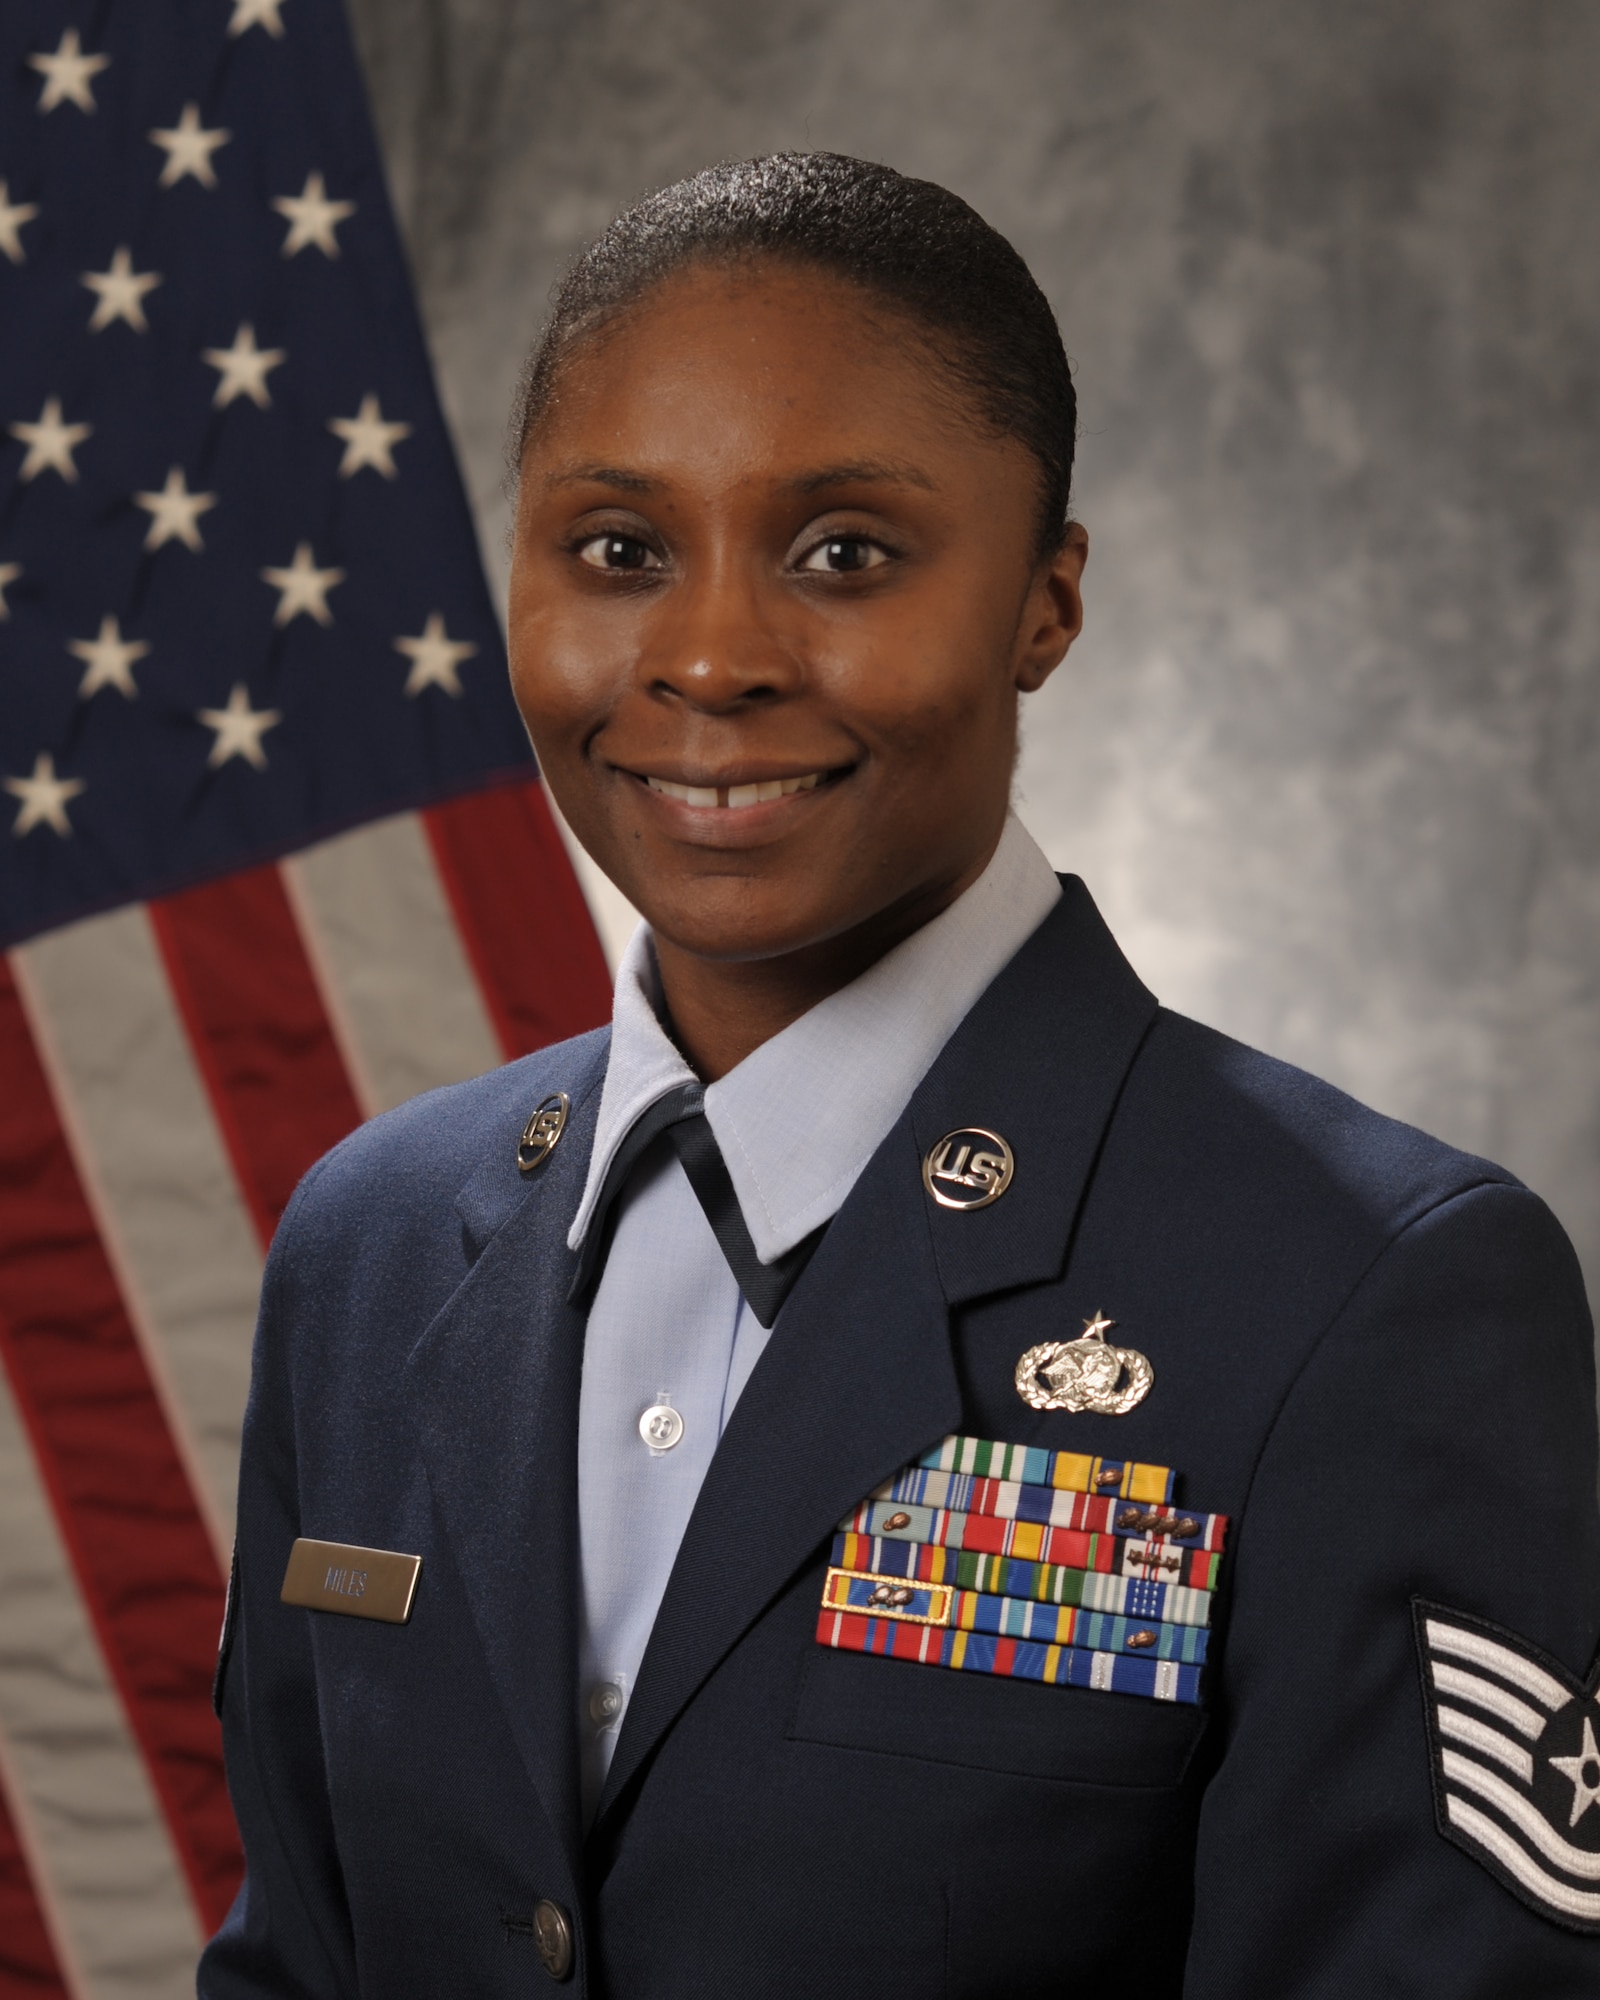 Tech. Sgt. Carlise Miles, 35th Logistics Readiness Squadron, has been named 5th Air Force's 2016 Noncommissioned Officer of the Year.